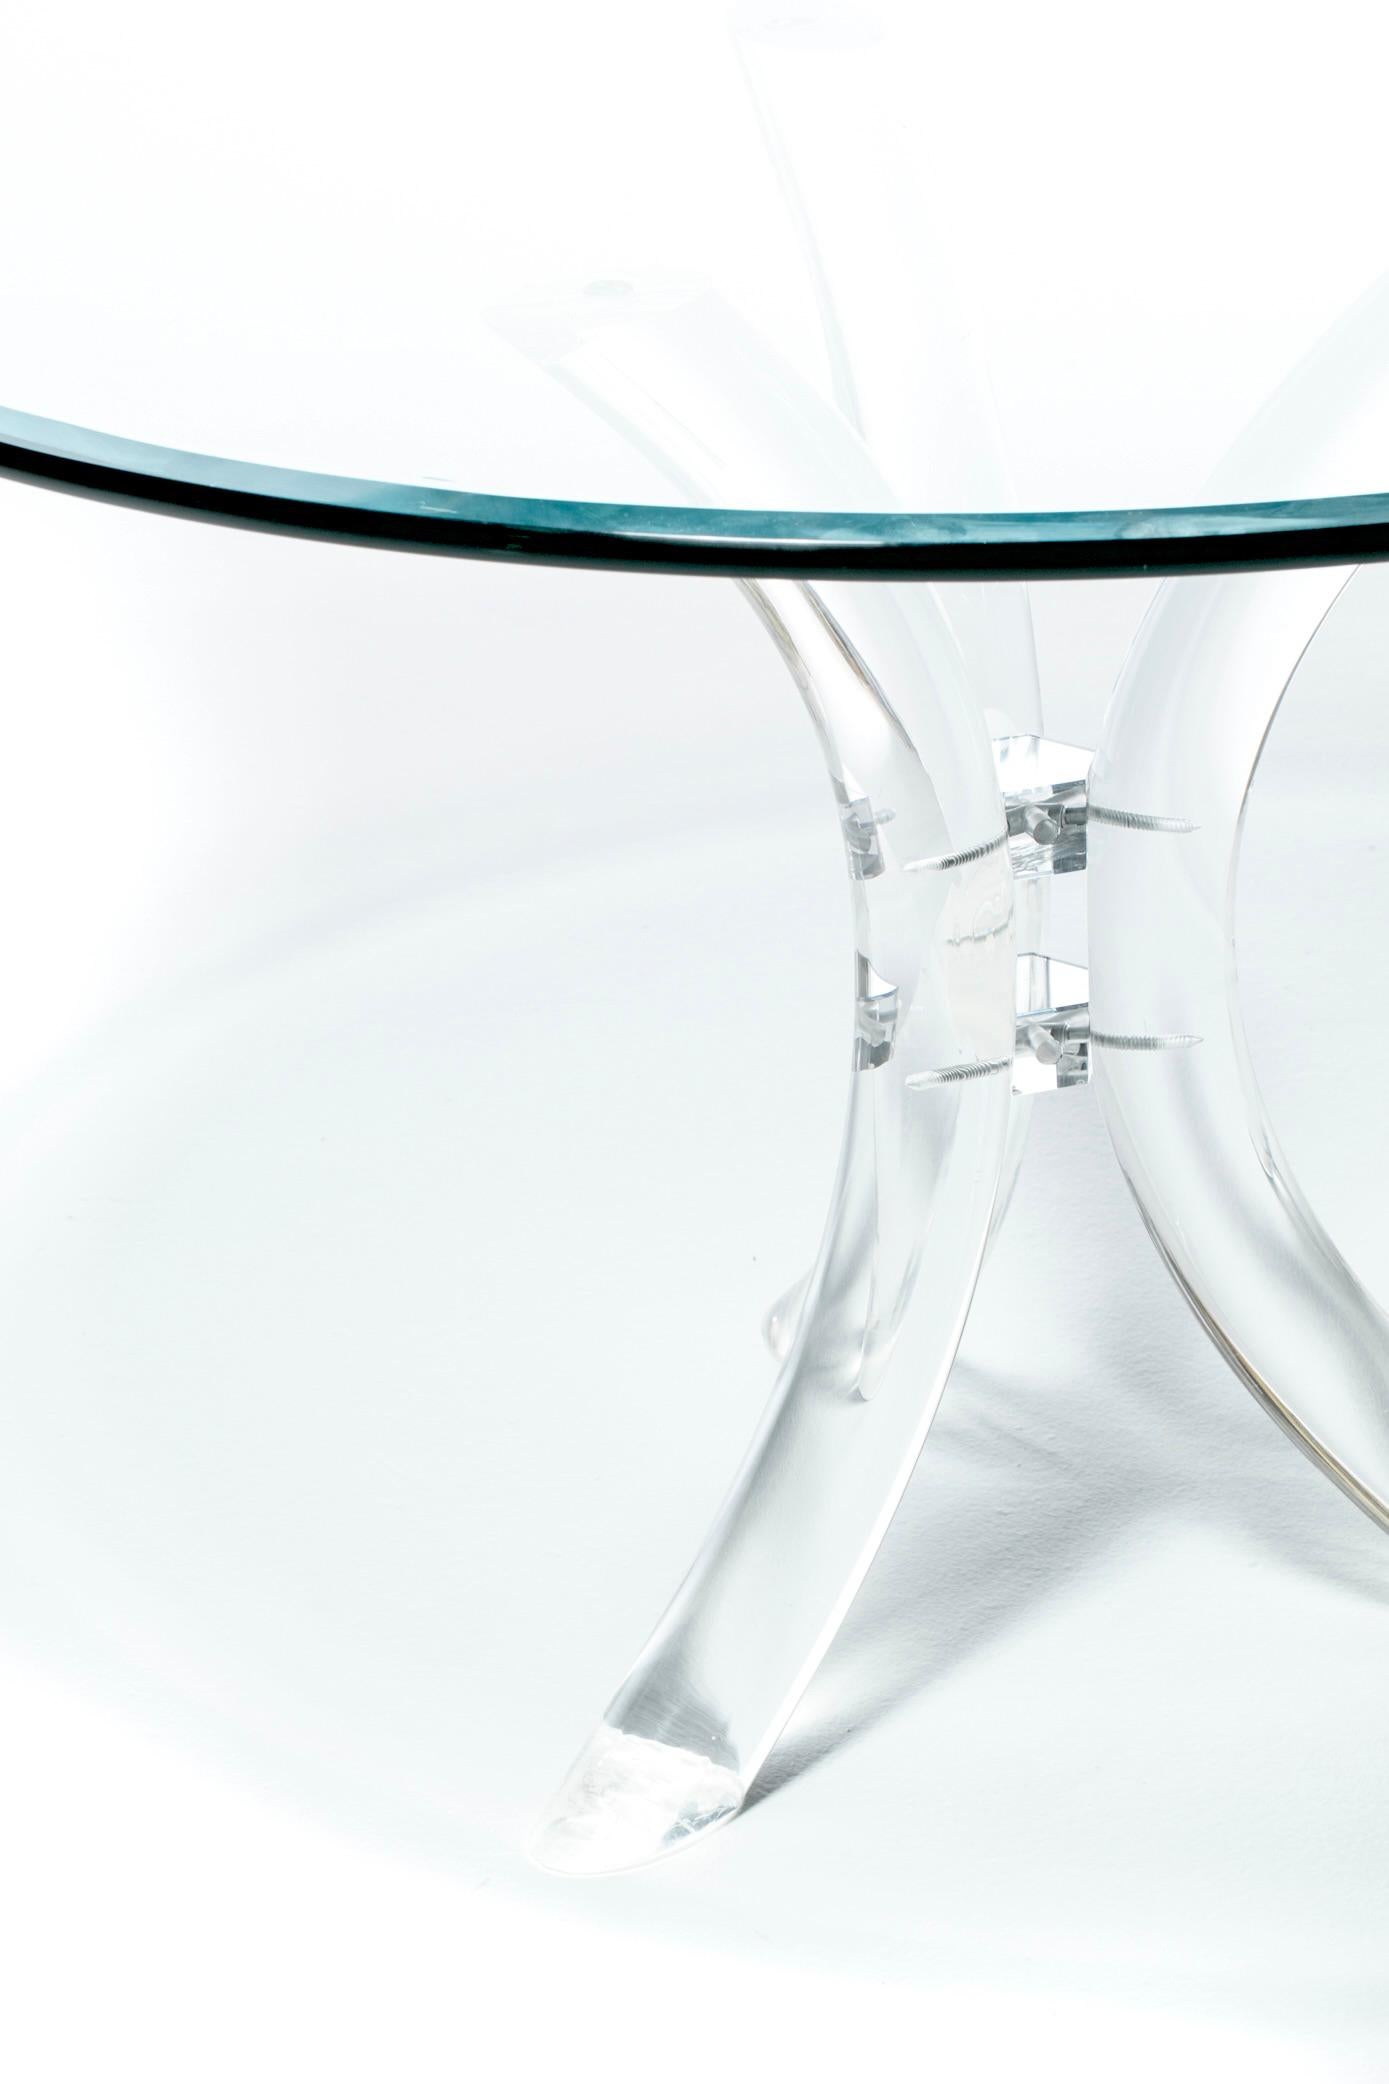 Lucite Hollywood Regency Dining Table circa 1970 For Sale 5